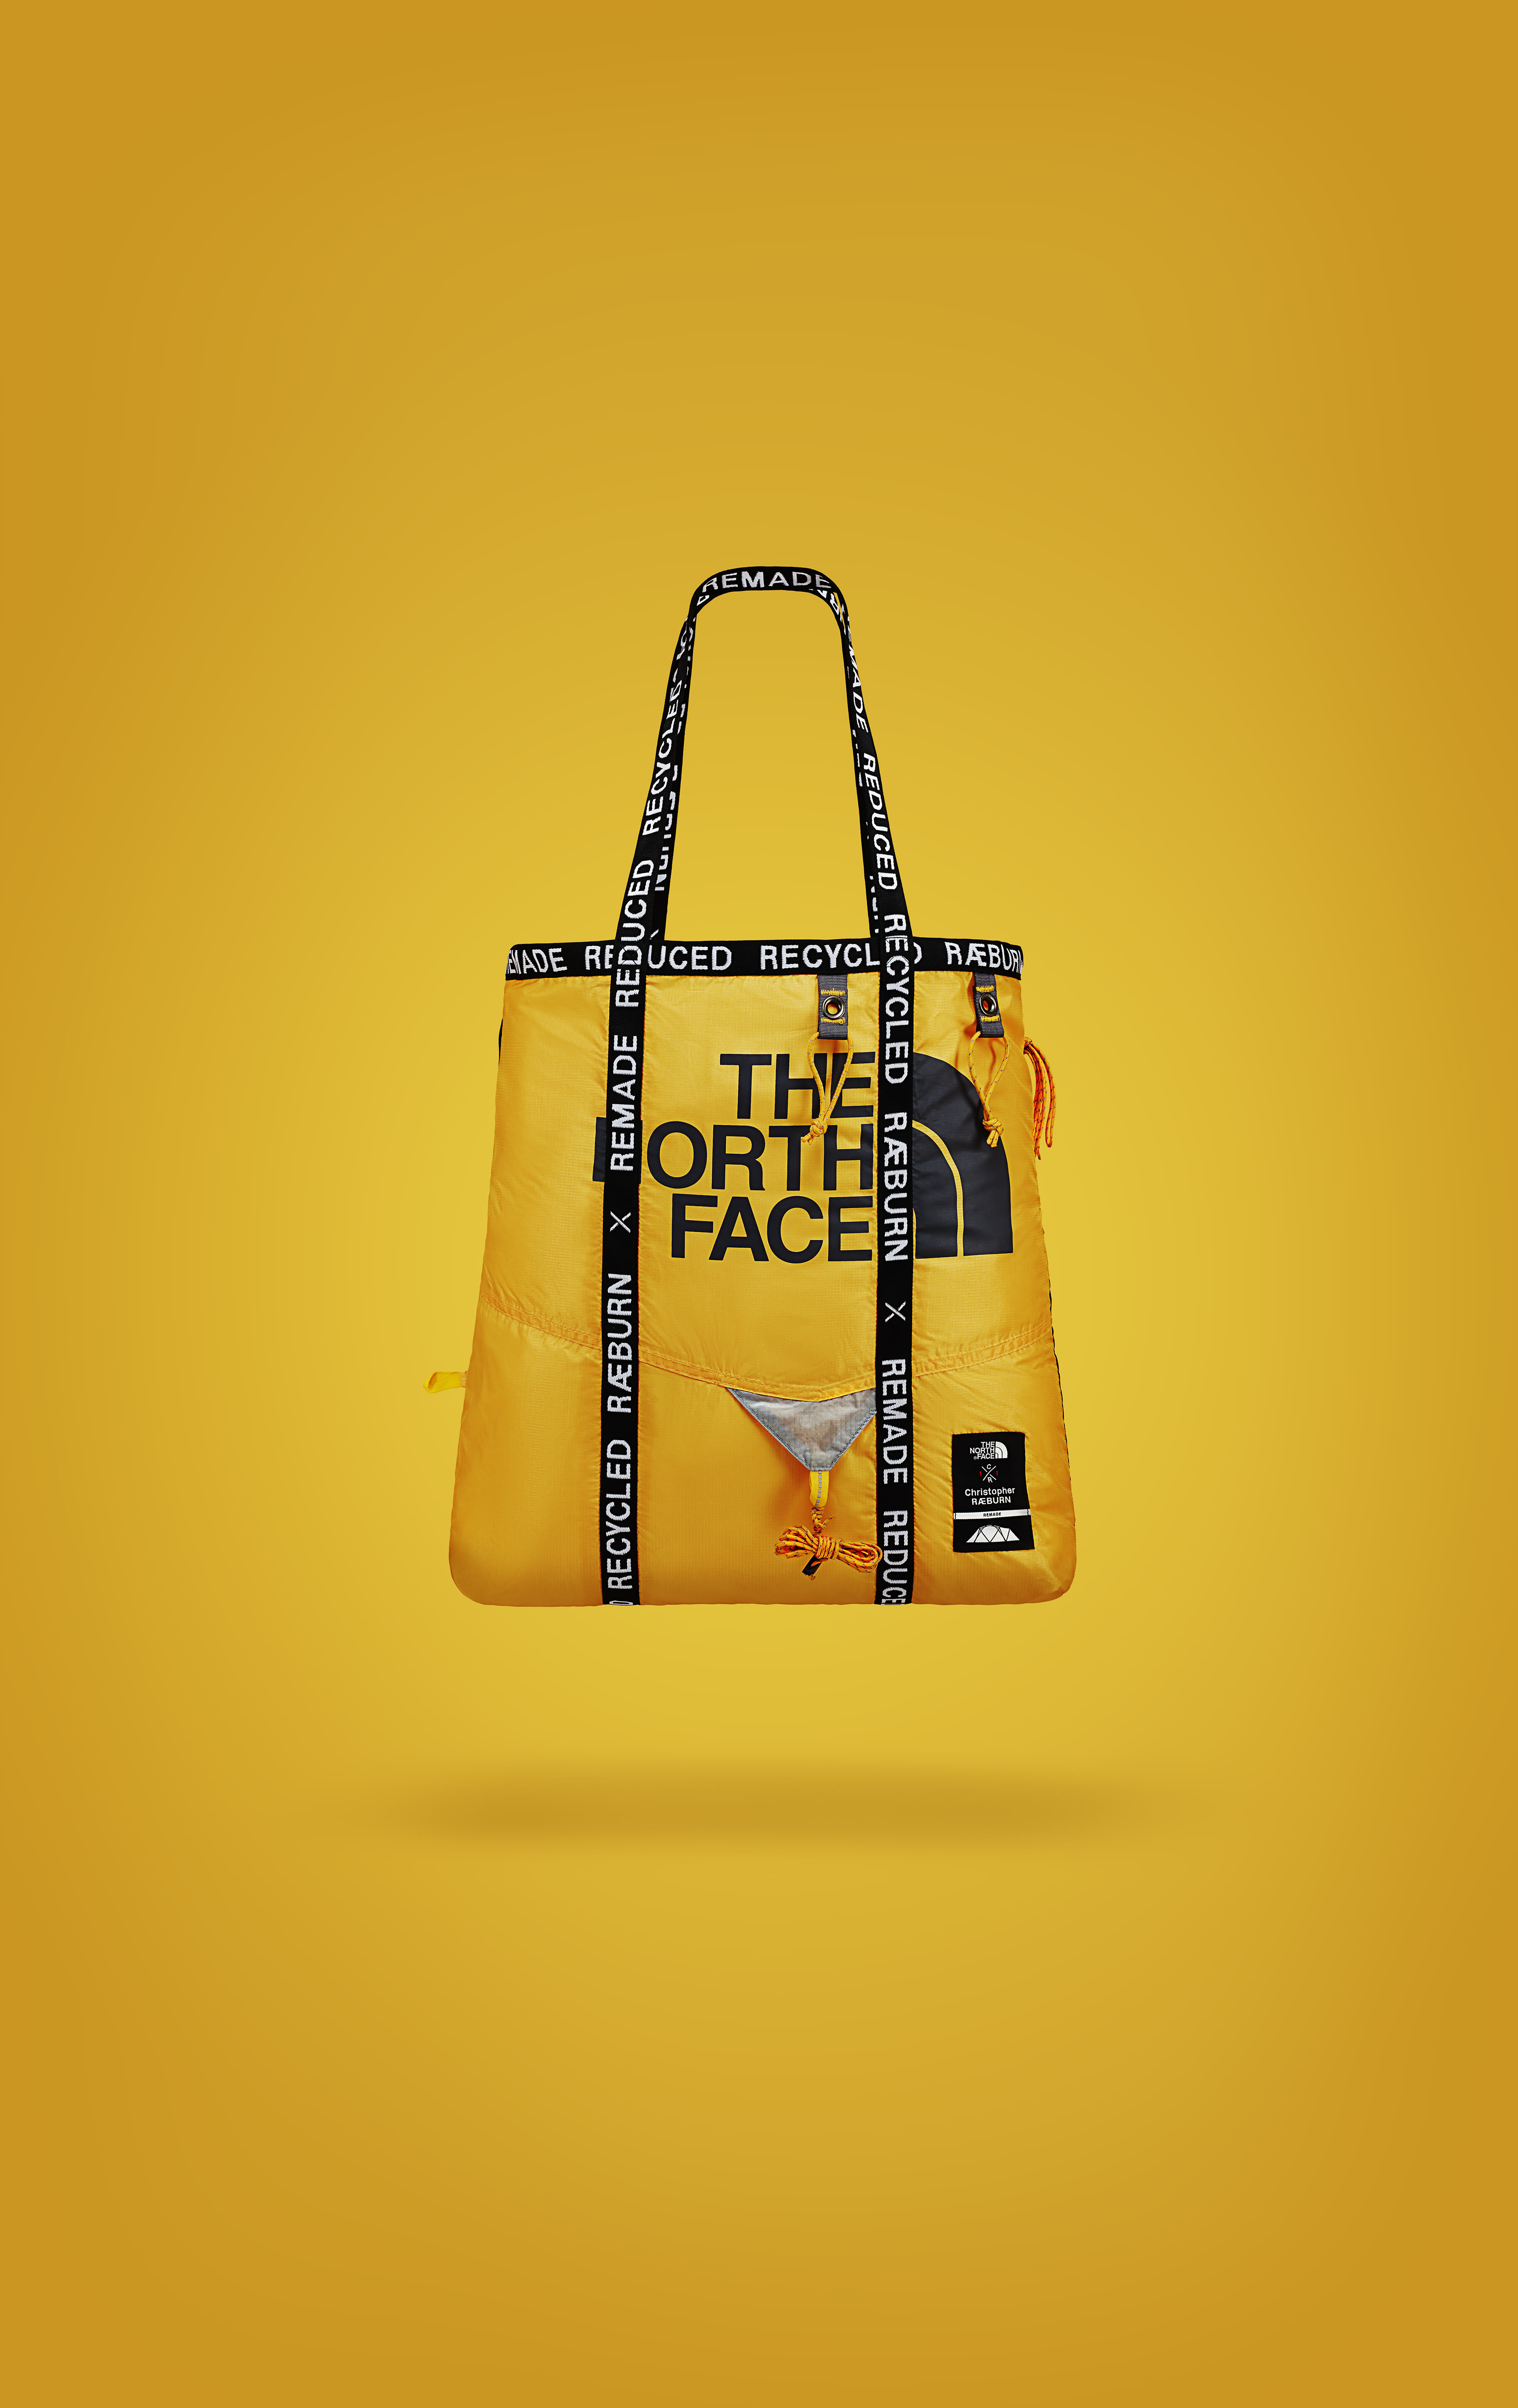 The North Face Aims to Reduce Man-Made Waste in Collaboration with ...